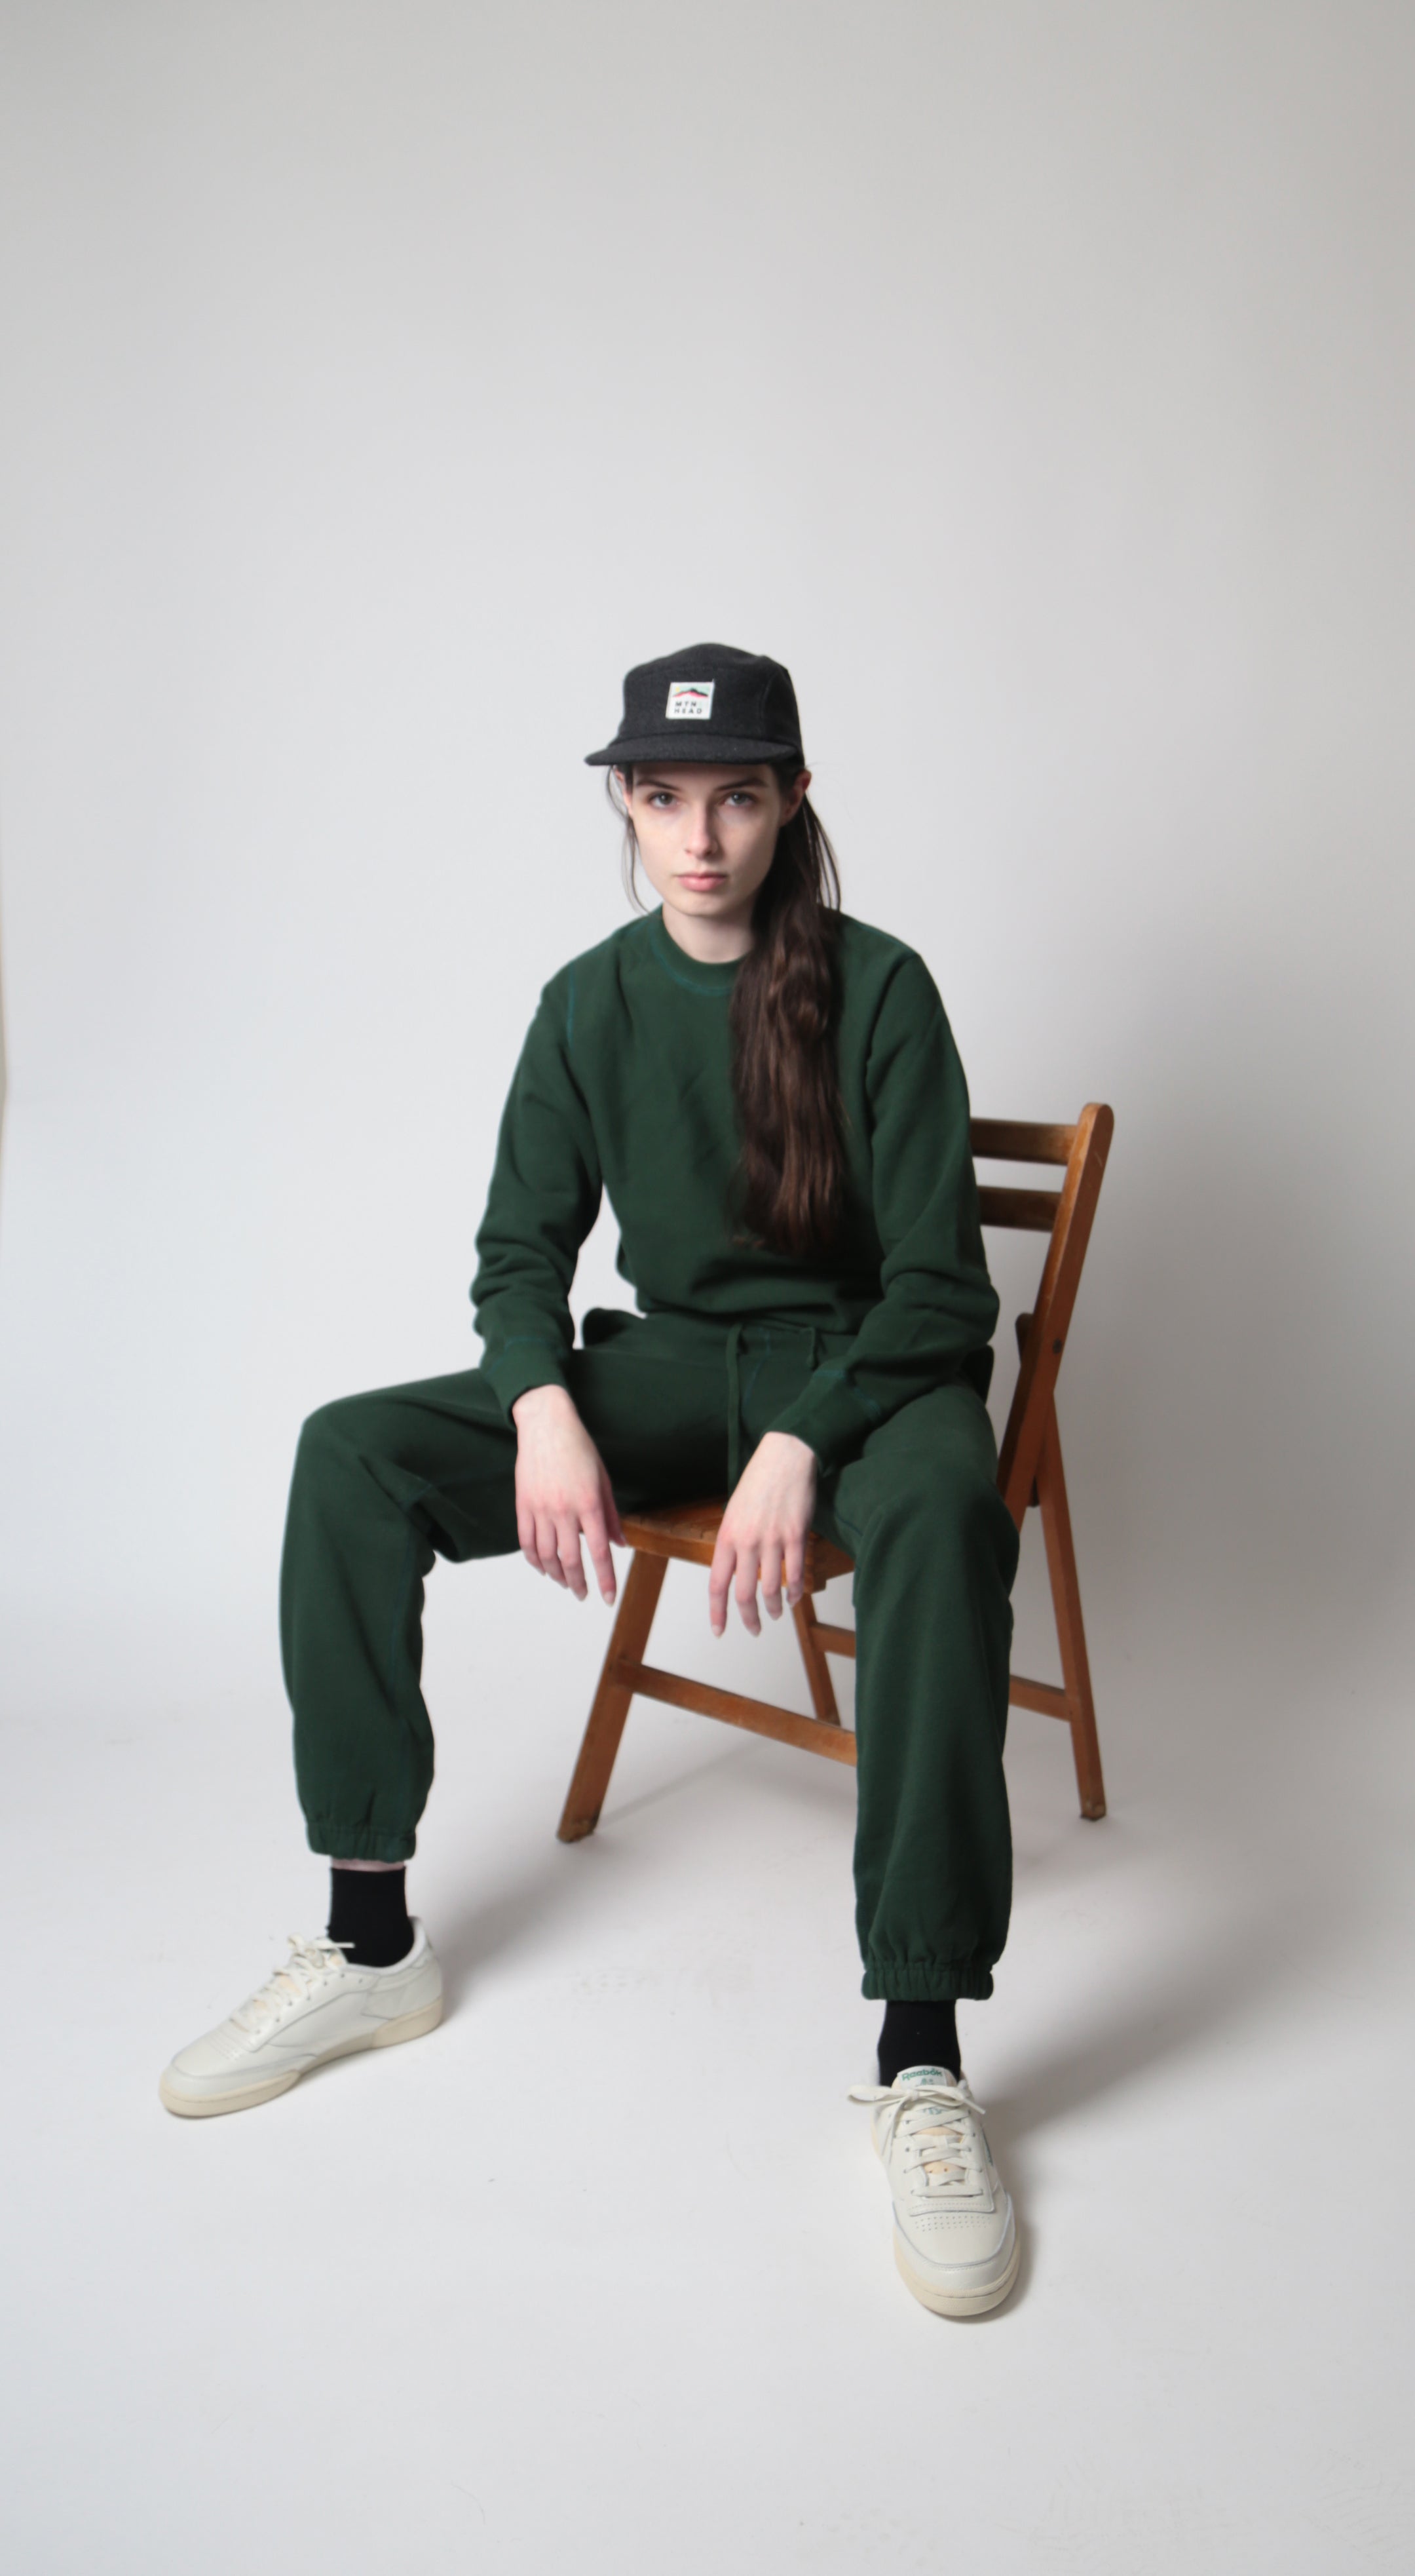 Cabin Pant - Forest Green